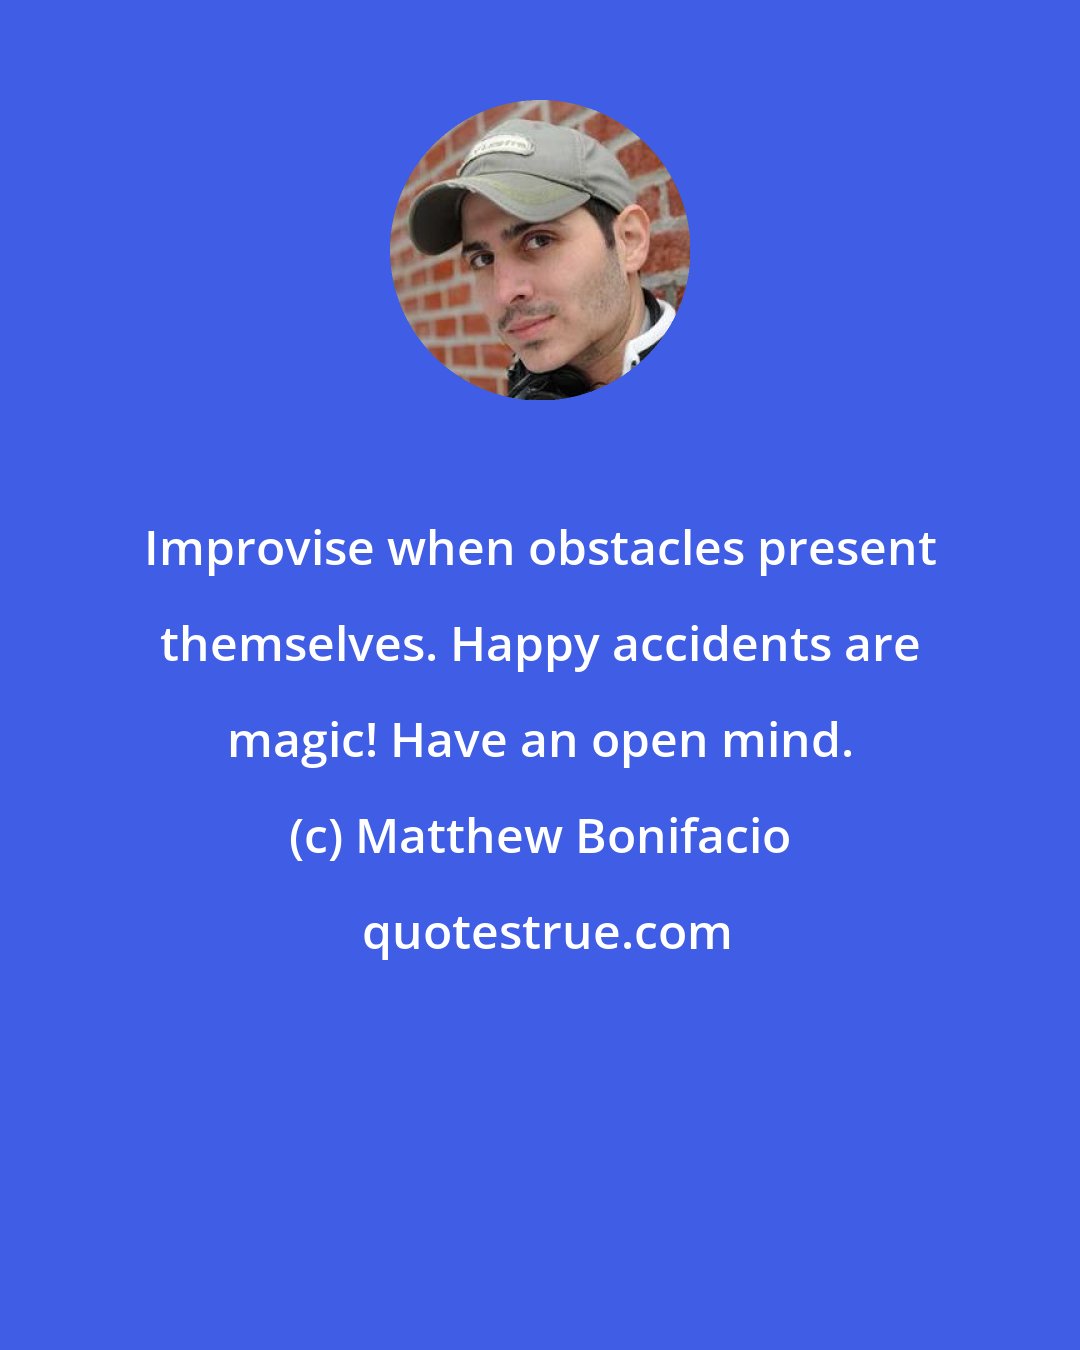 Matthew Bonifacio: Improvise when obstacles present themselves. Happy accidents are magic! Have an open mind.